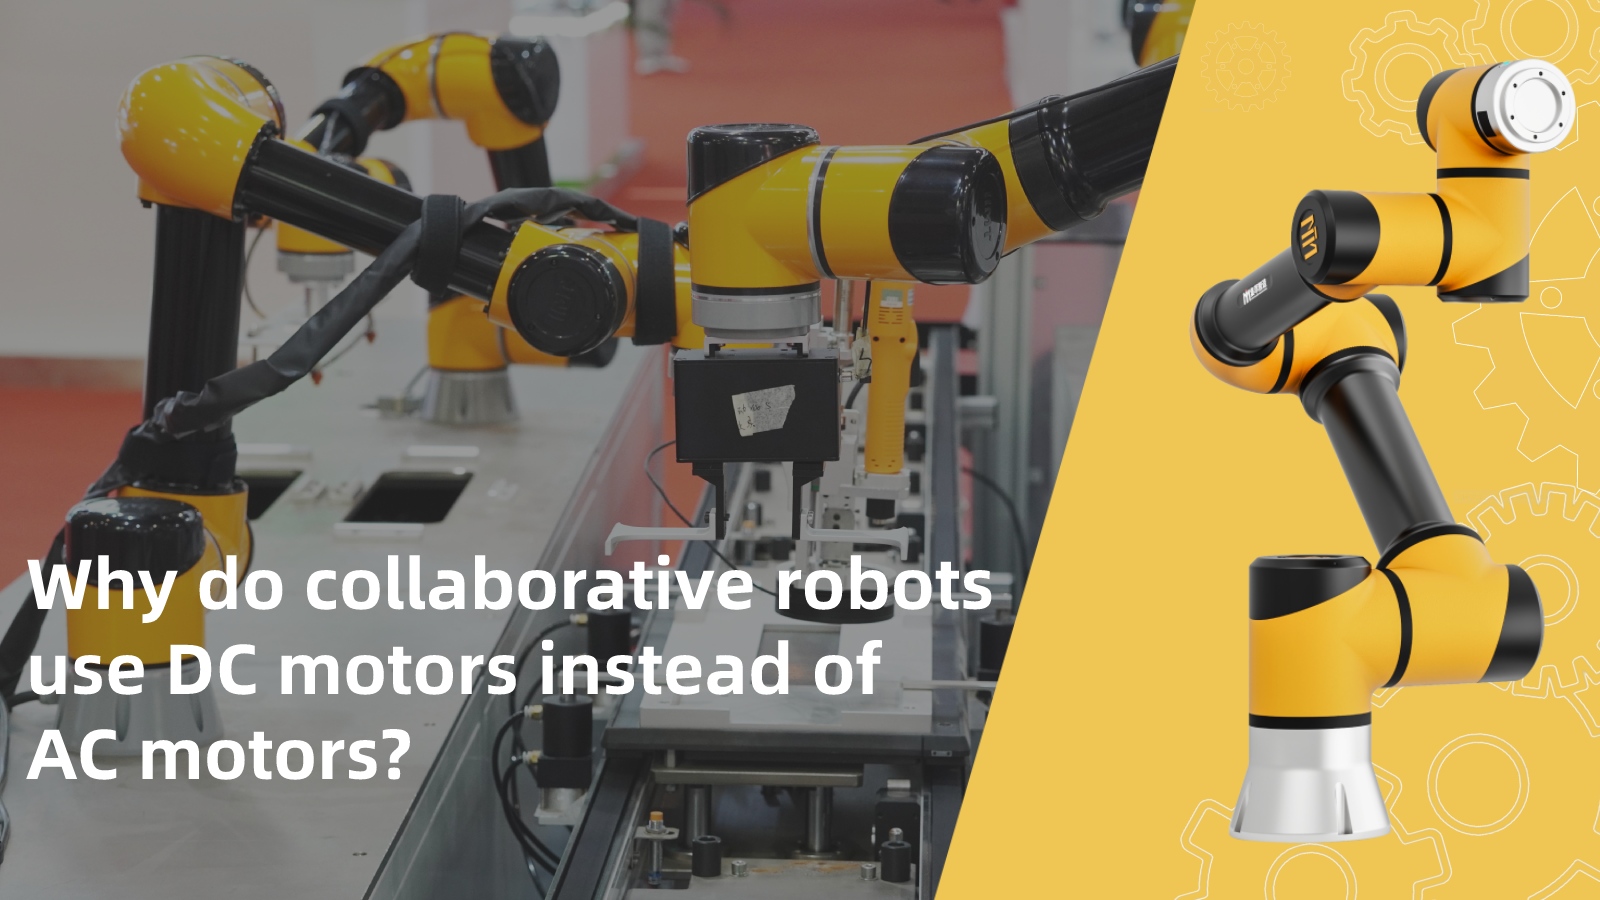 Why do collaborative robots use DC motors instead of AC motors?